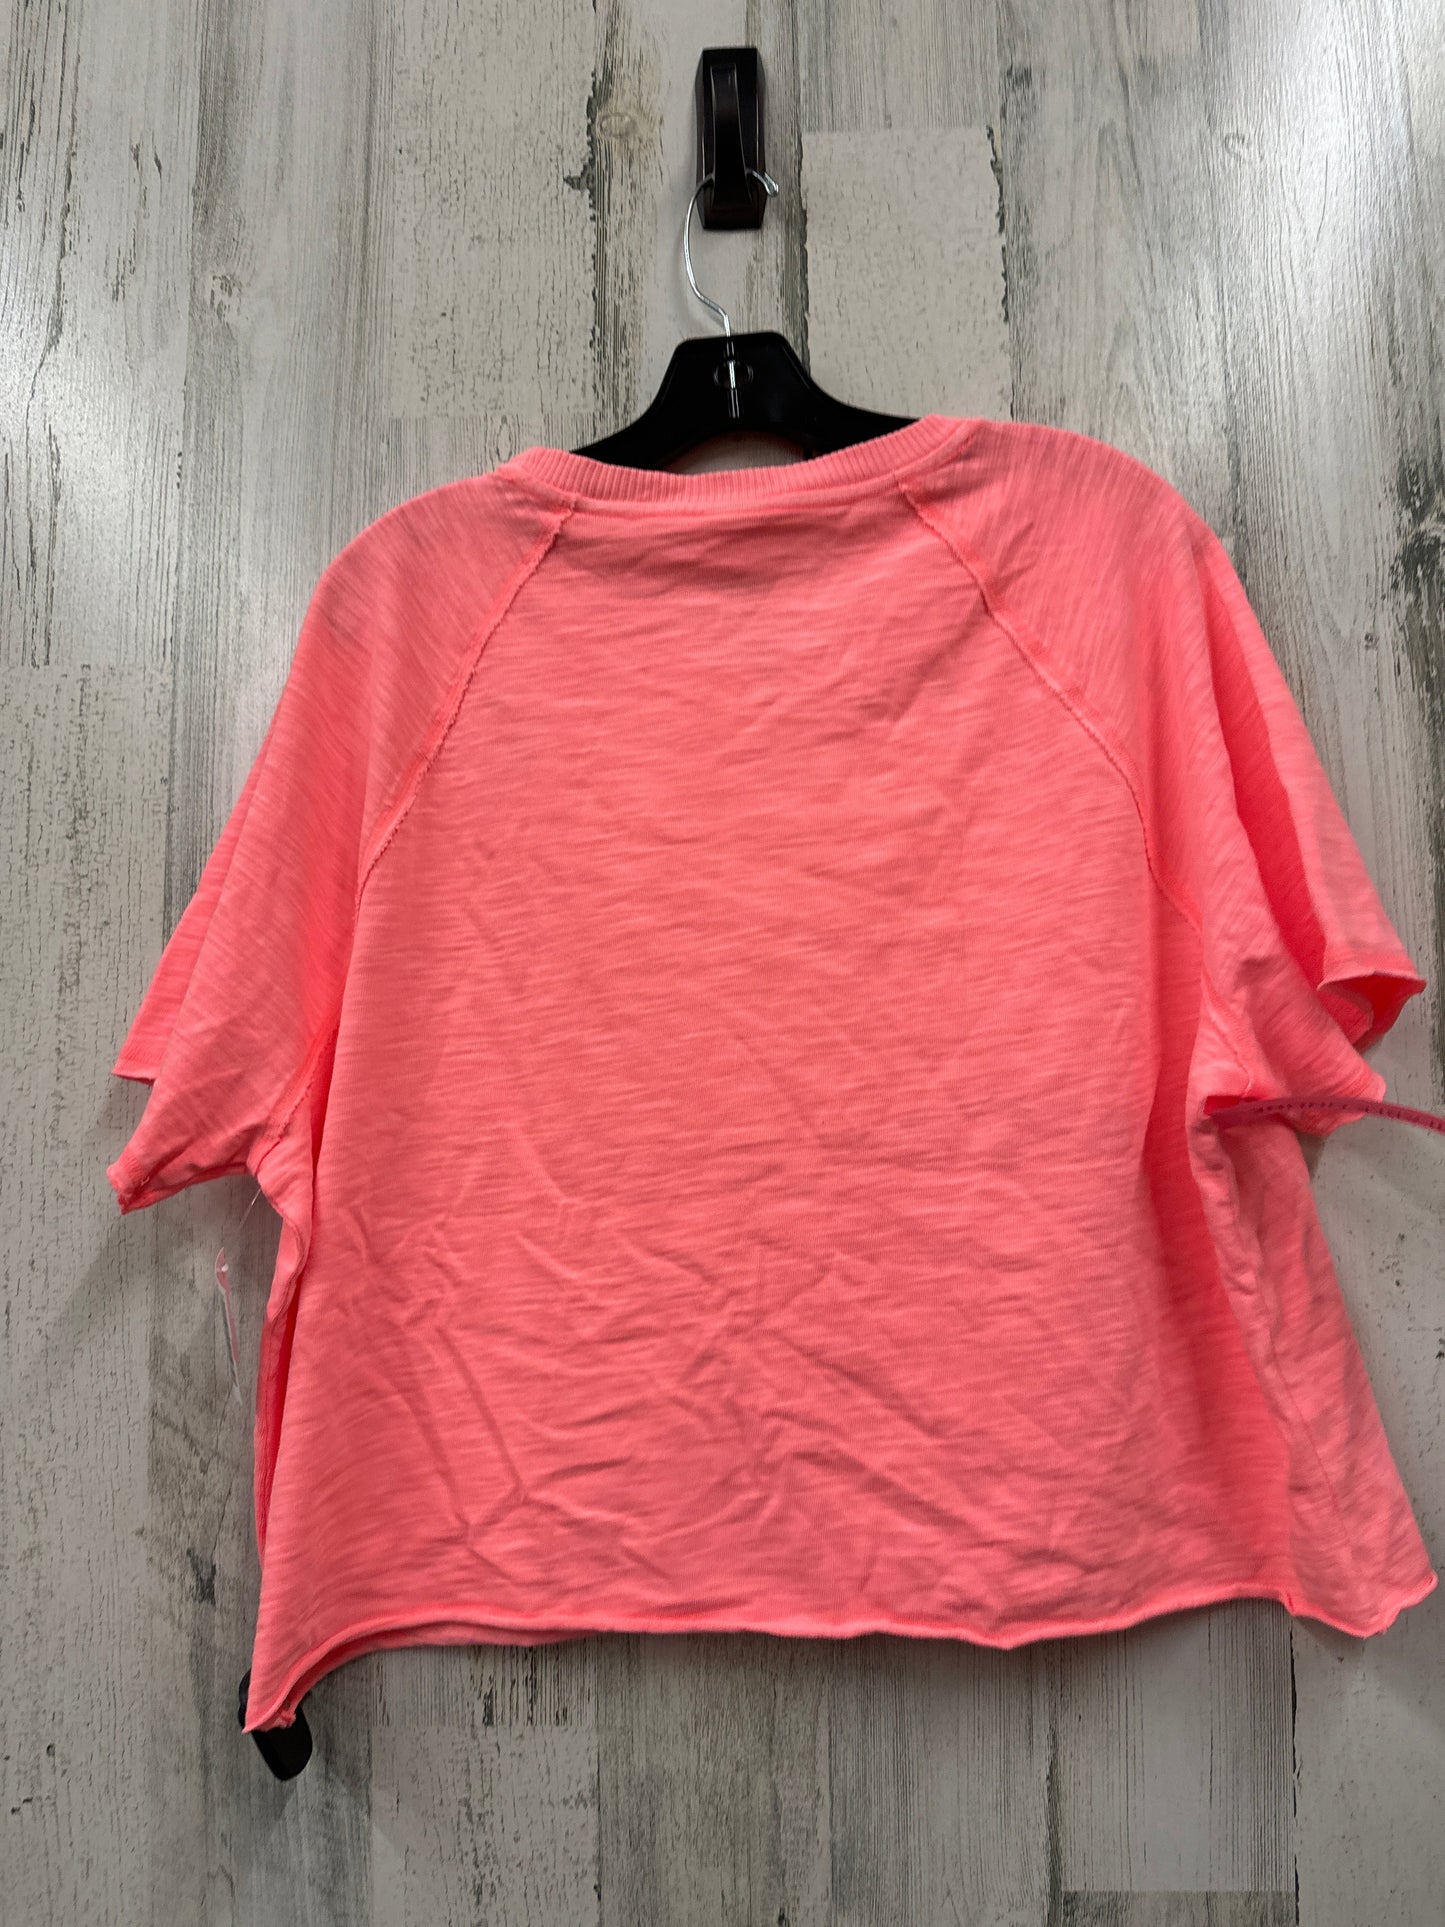 Pink Top Short Sleeve Pink, Size L